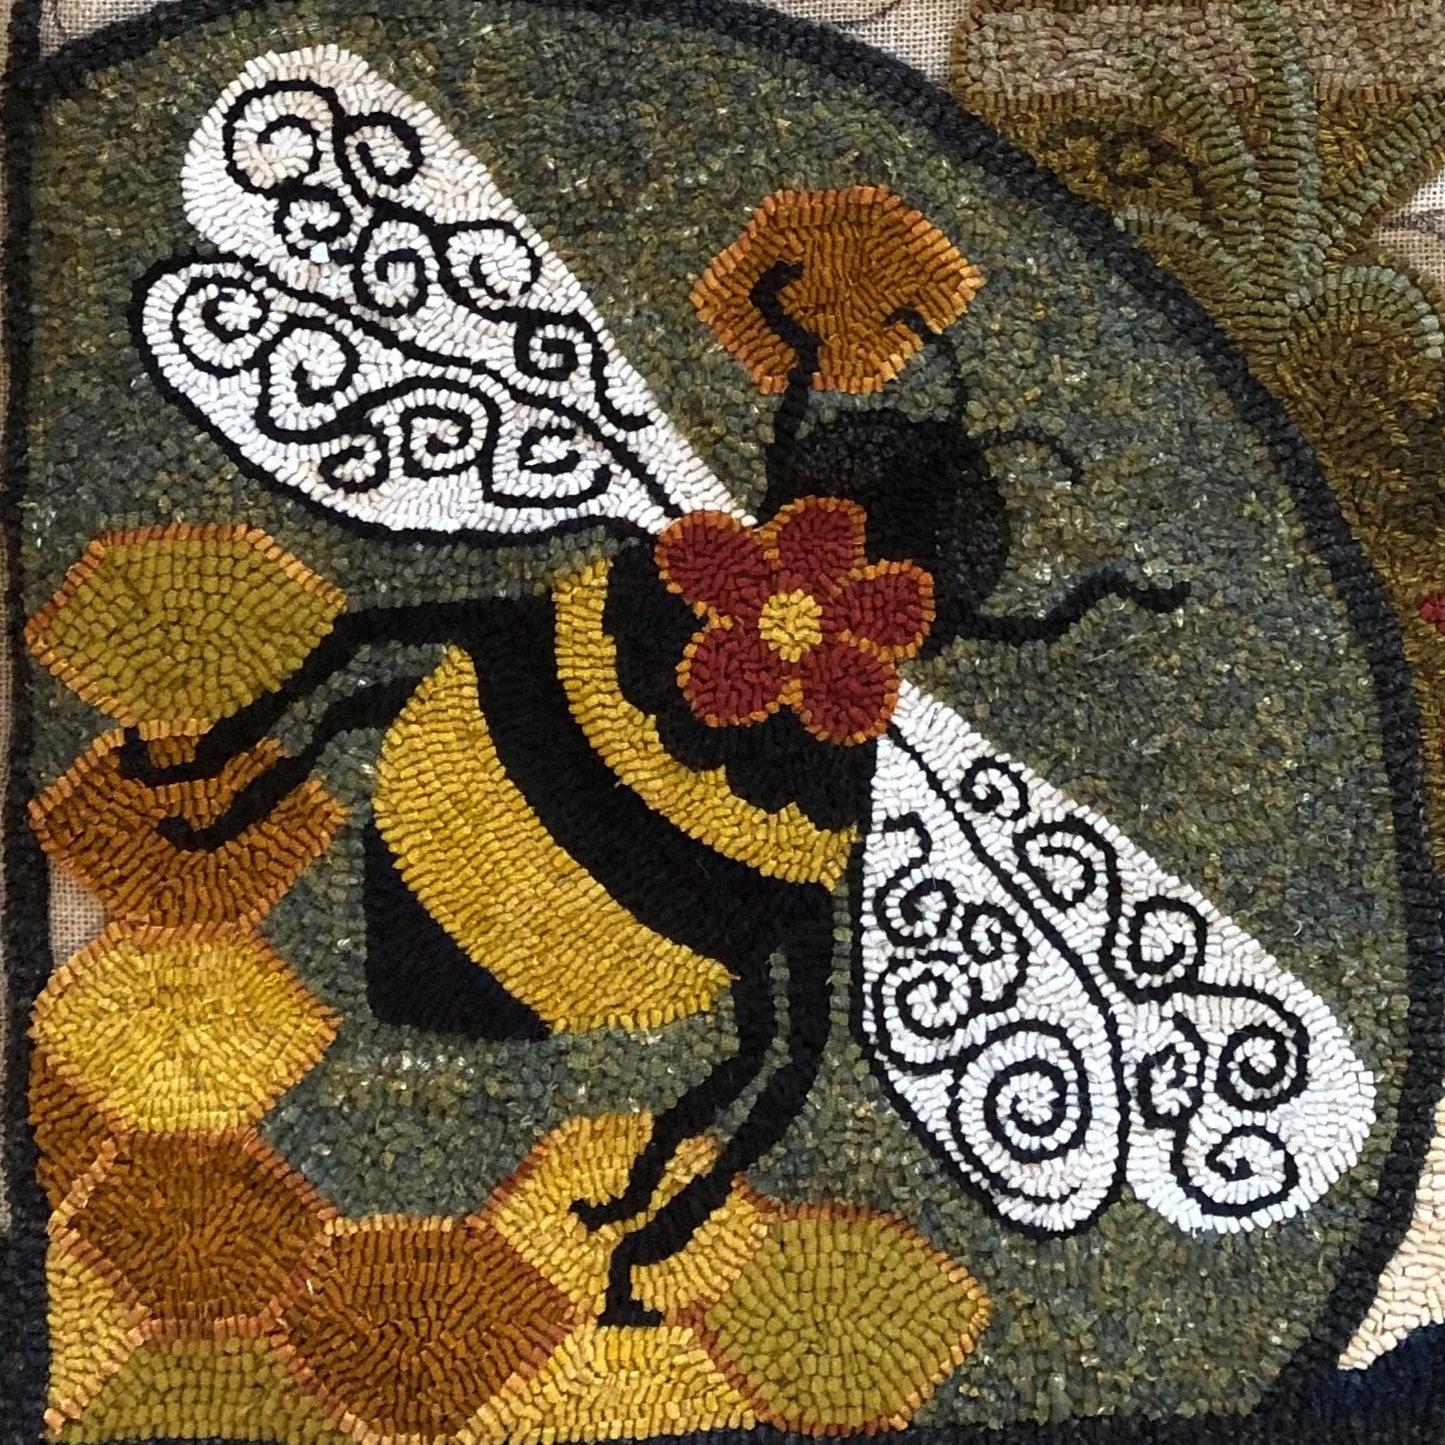 Honey Bee- Rug Hooking pattern on Linen designed by Kelly Kanyok of Orphaned Wool. This is a wonderful Bumblebee Pattern with a Bee Skep and Honeycombs background. The bee are enjoying all the flowers is this sweet design.